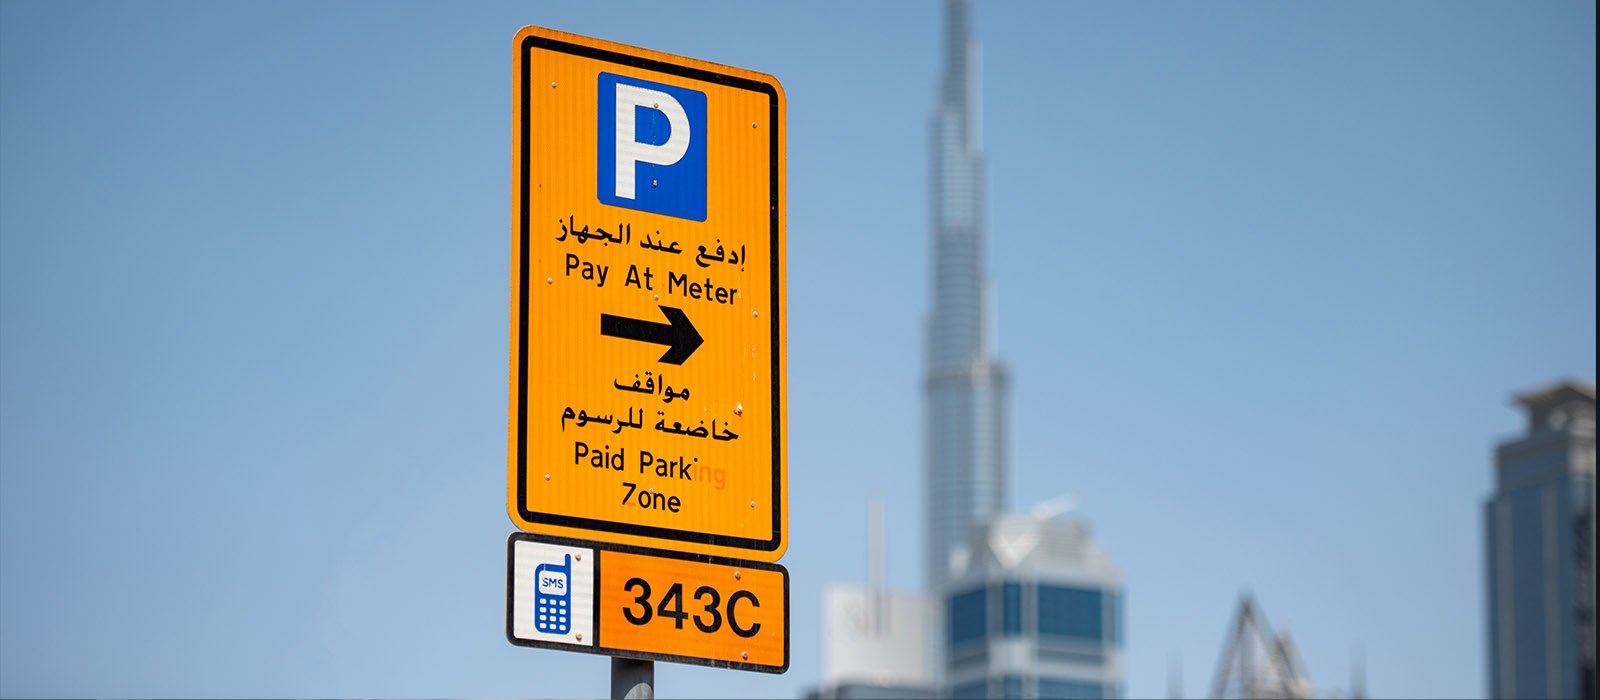 Free Parking Announced in Dubai and Sharjah - Coming Soon in UAE